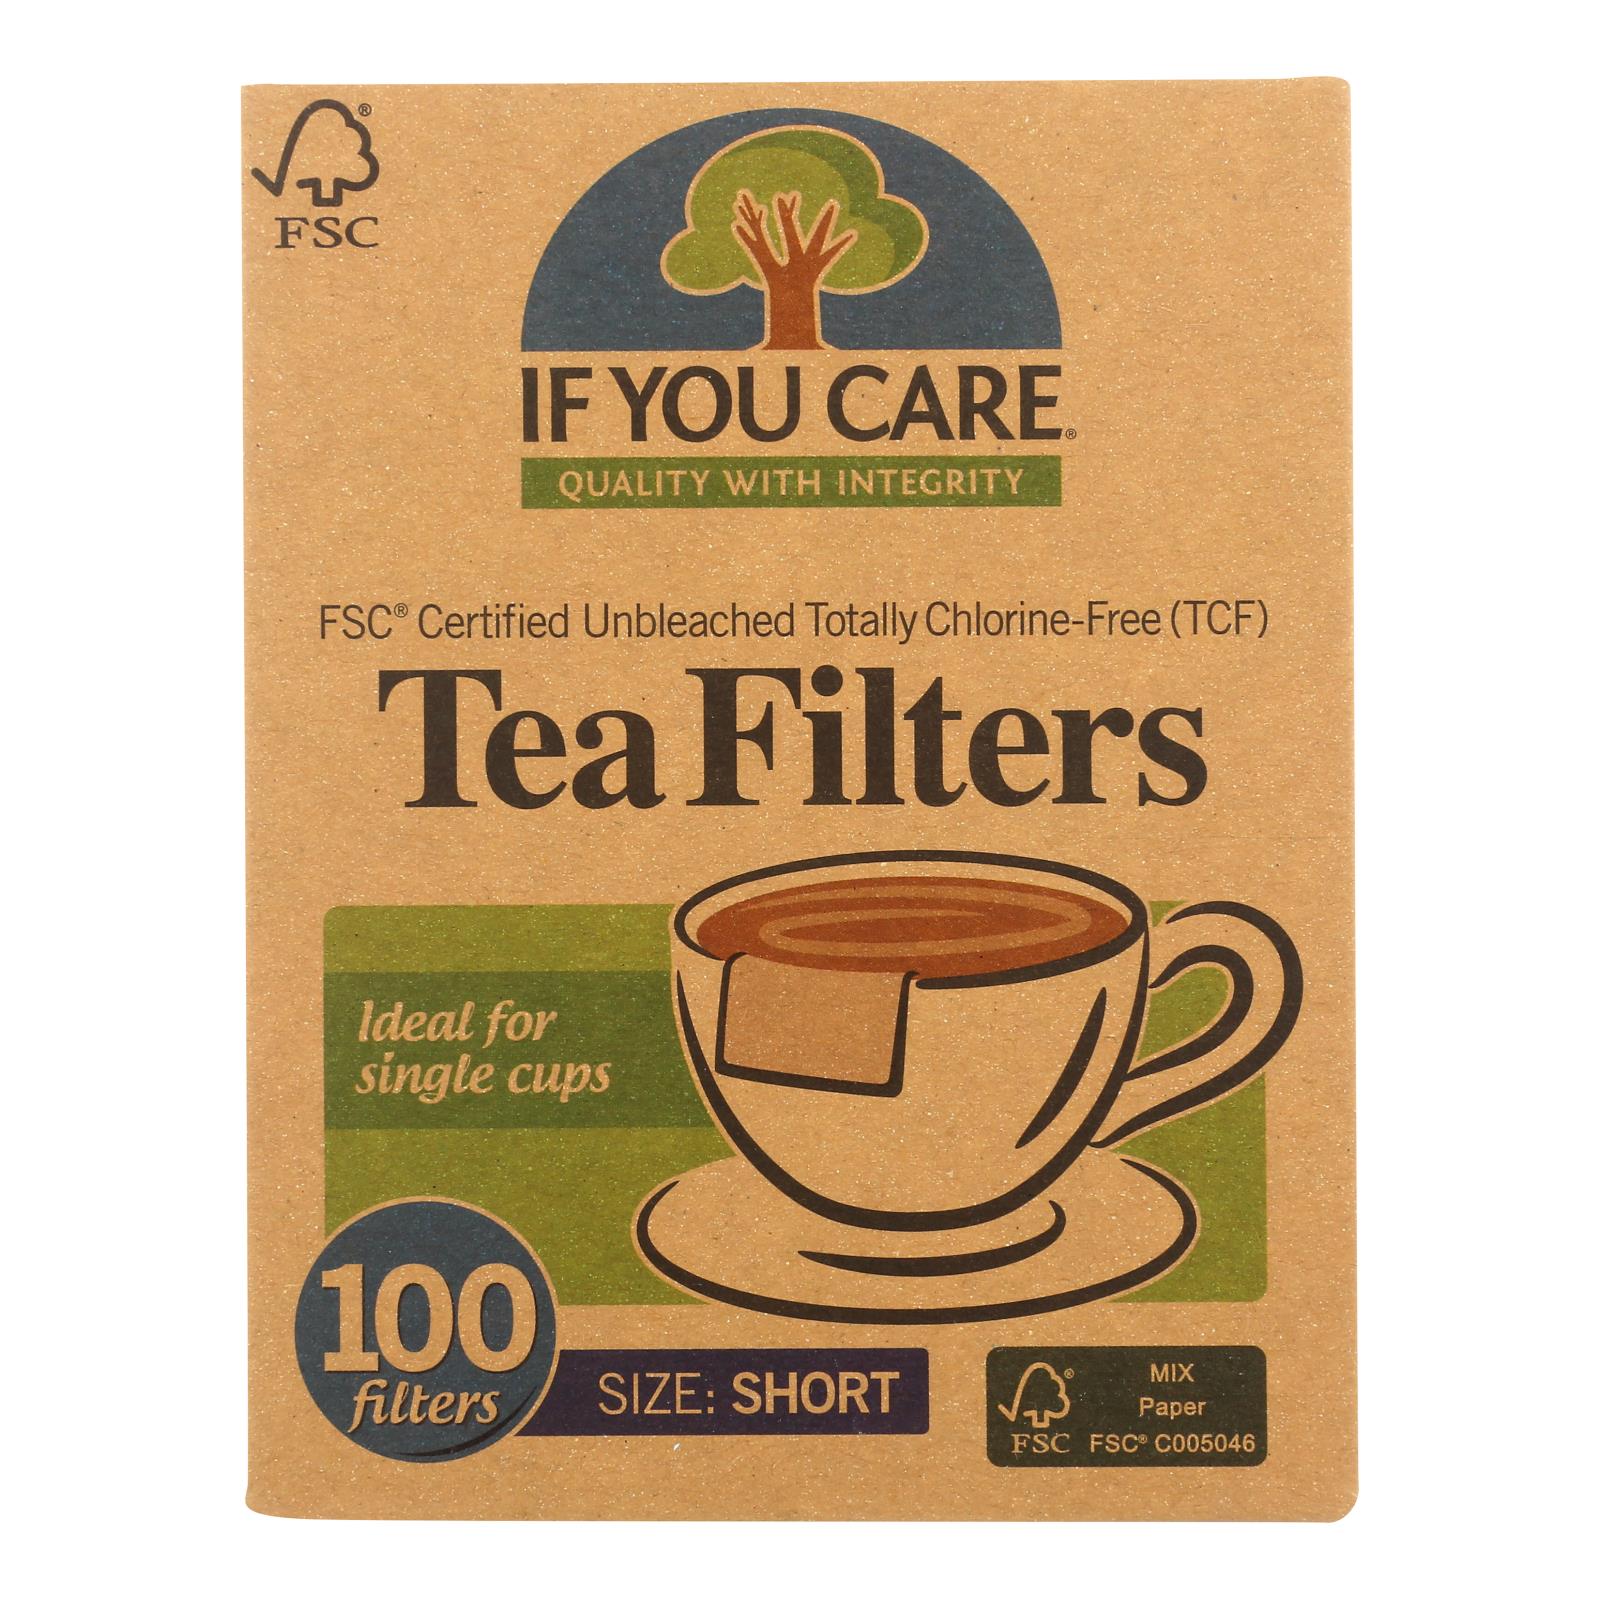 If You Care Fsc Certified Unbleached Tea Filters  - Case Of 18 - 100 Ct